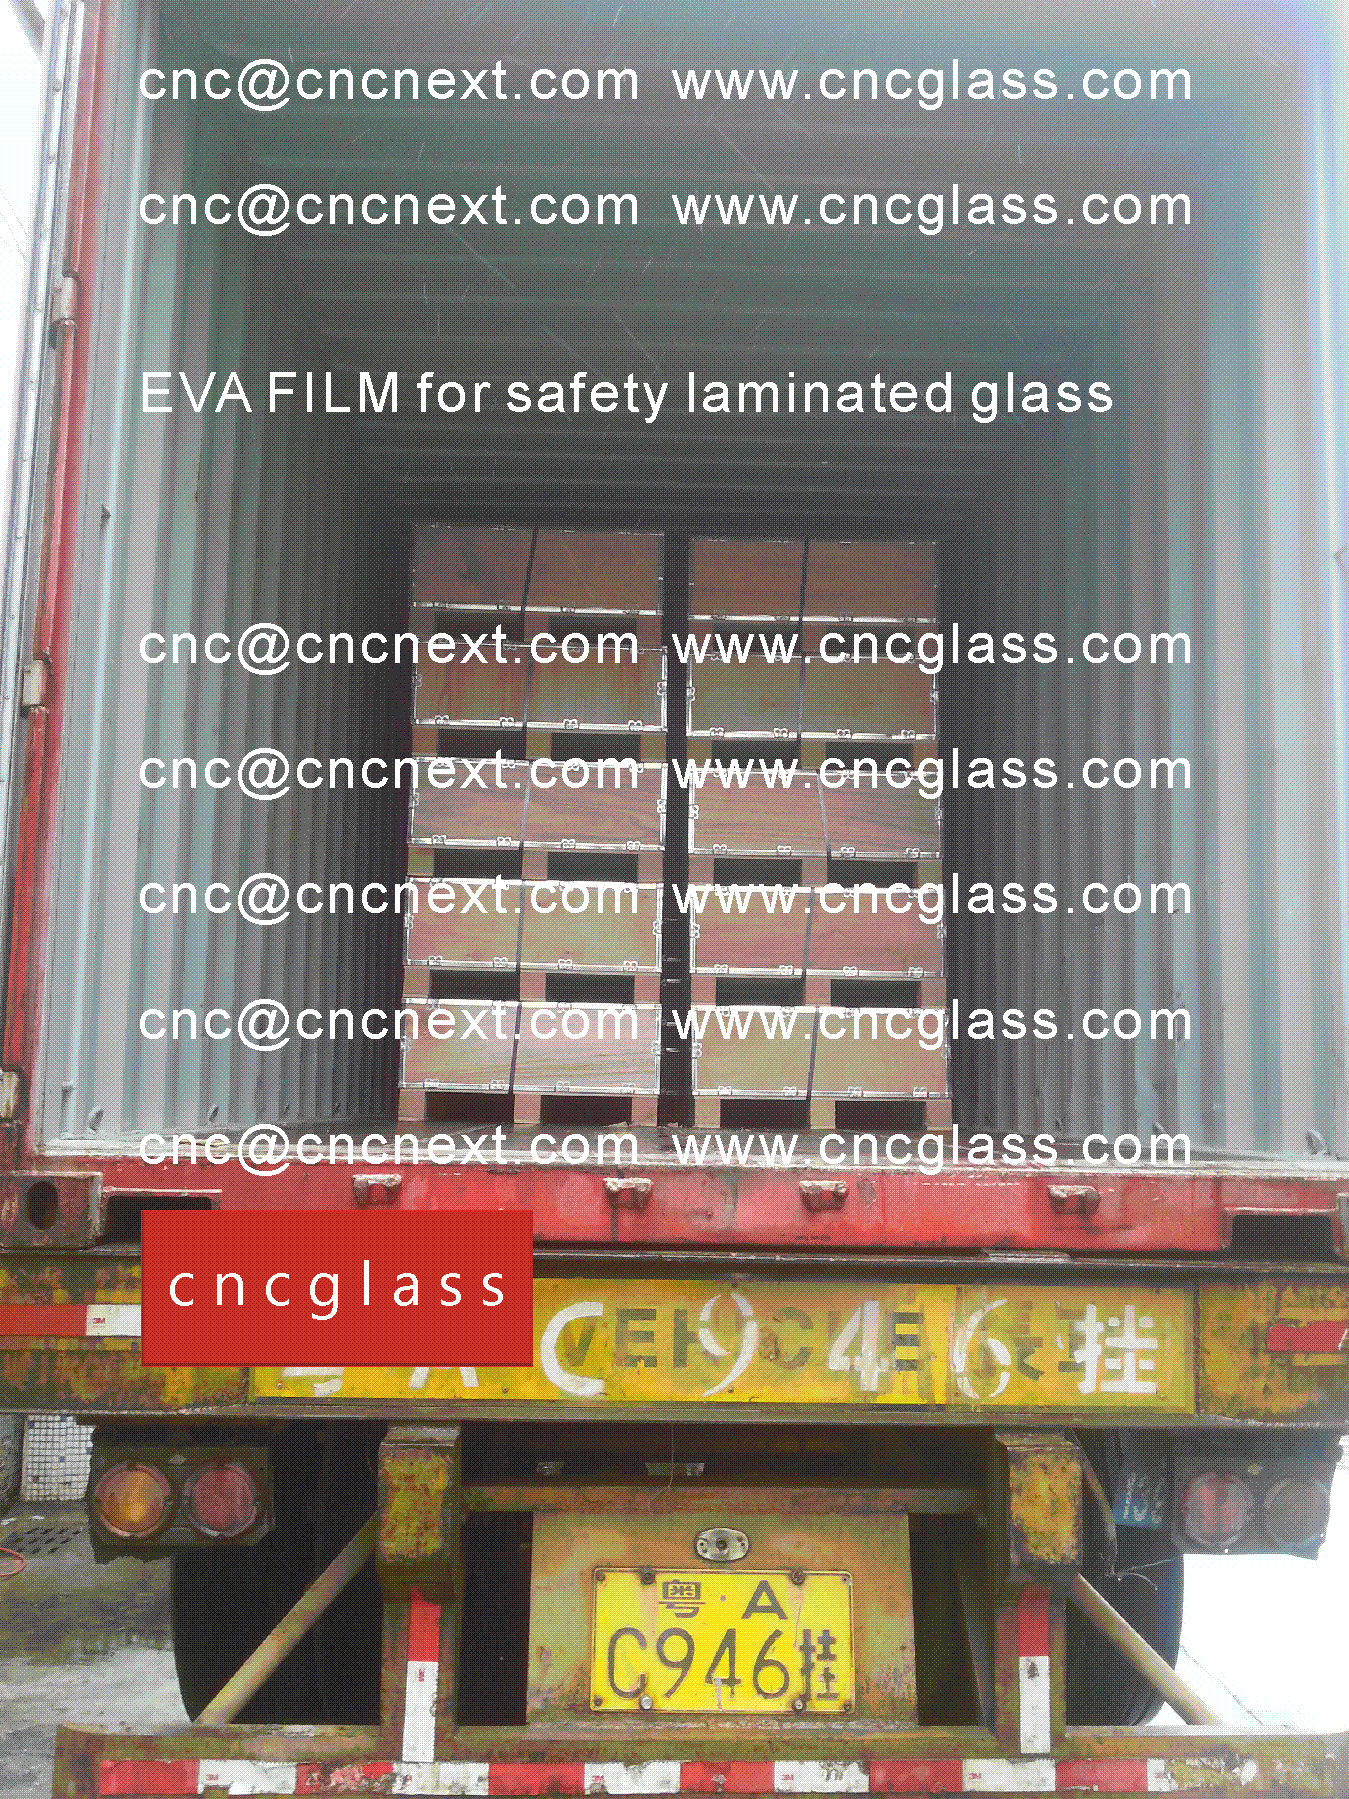 01 EVALAM INATING FILM LOADING CONTAINER (SAFETY LAMINATED GLASS)